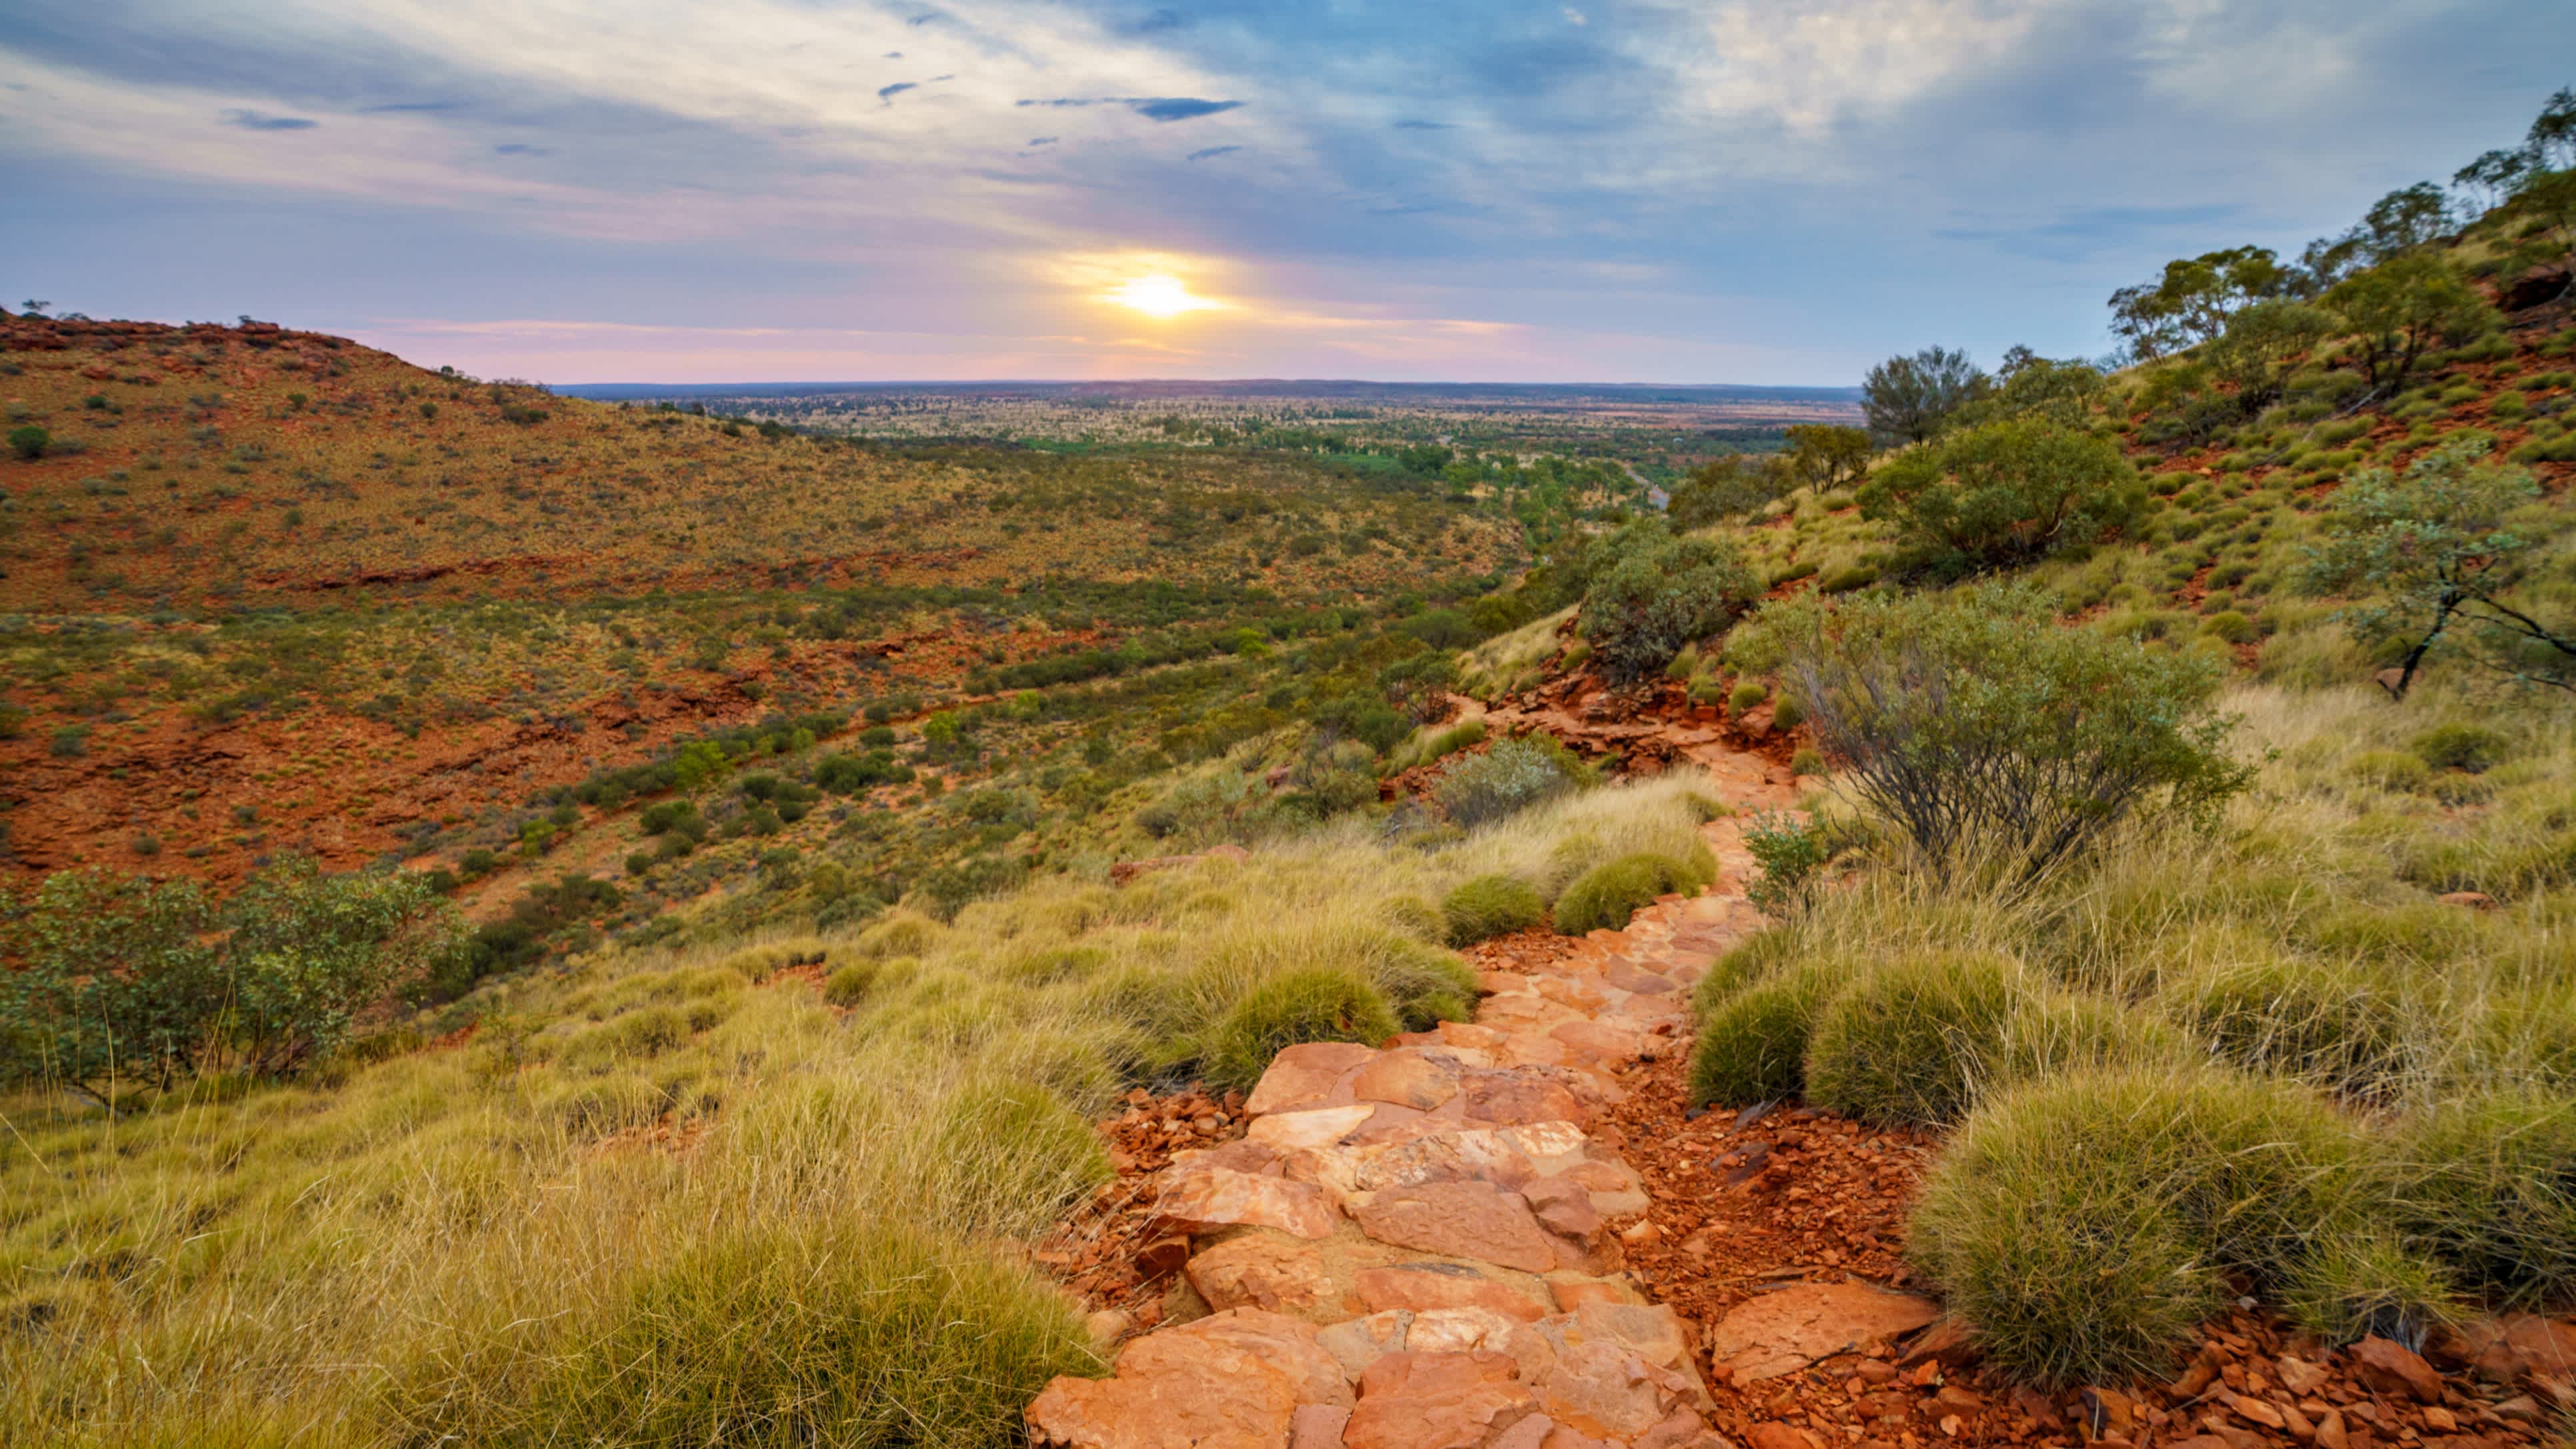 View over the landscape of Watarrka National Park in Australia at sunset.